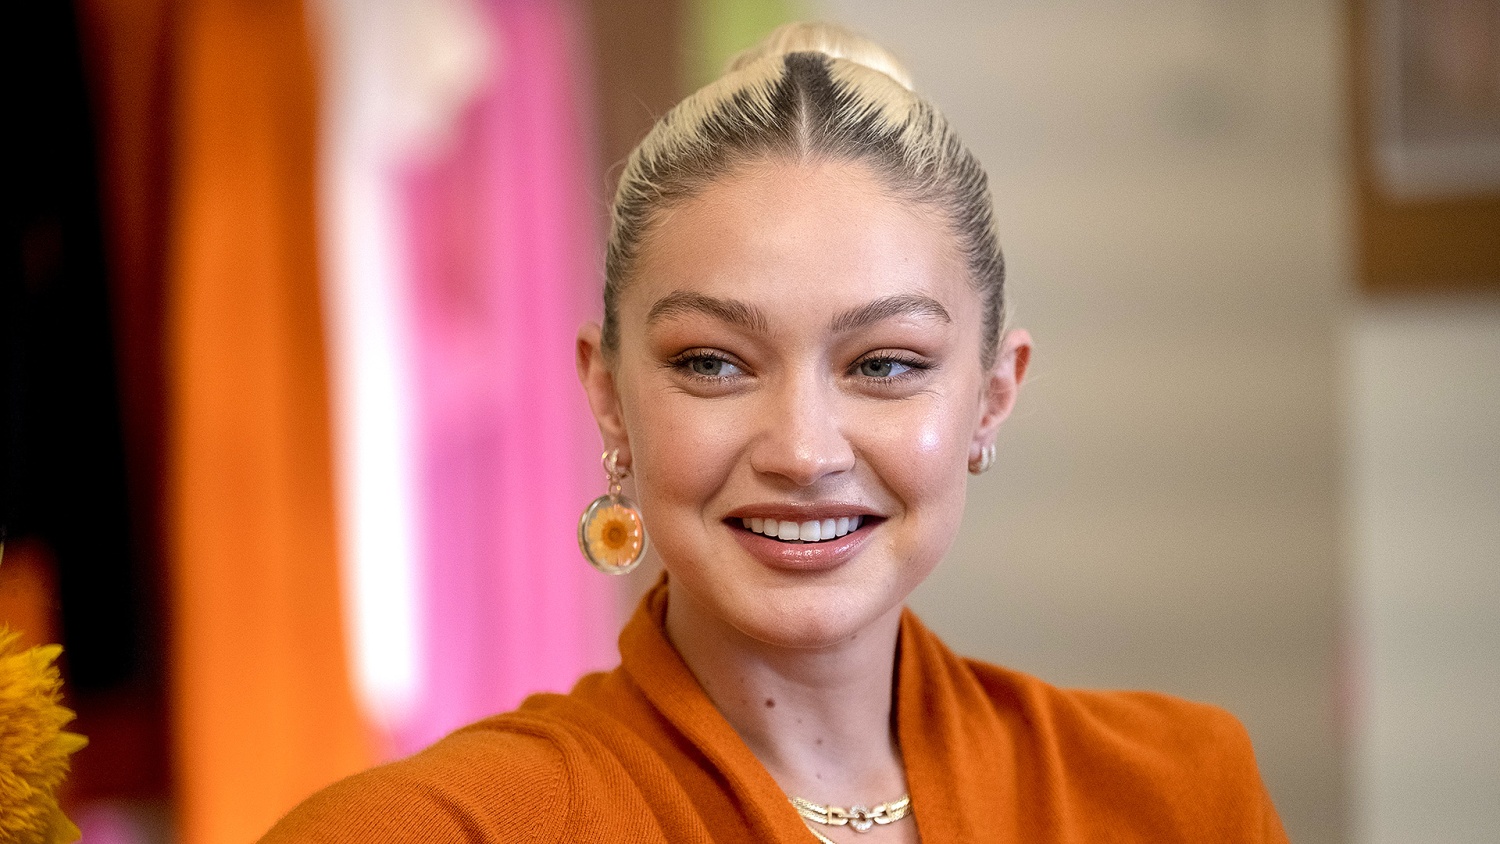 Gigi Hadid Says She's 'Glad To Be a Young Mom' To Daughter, Khai